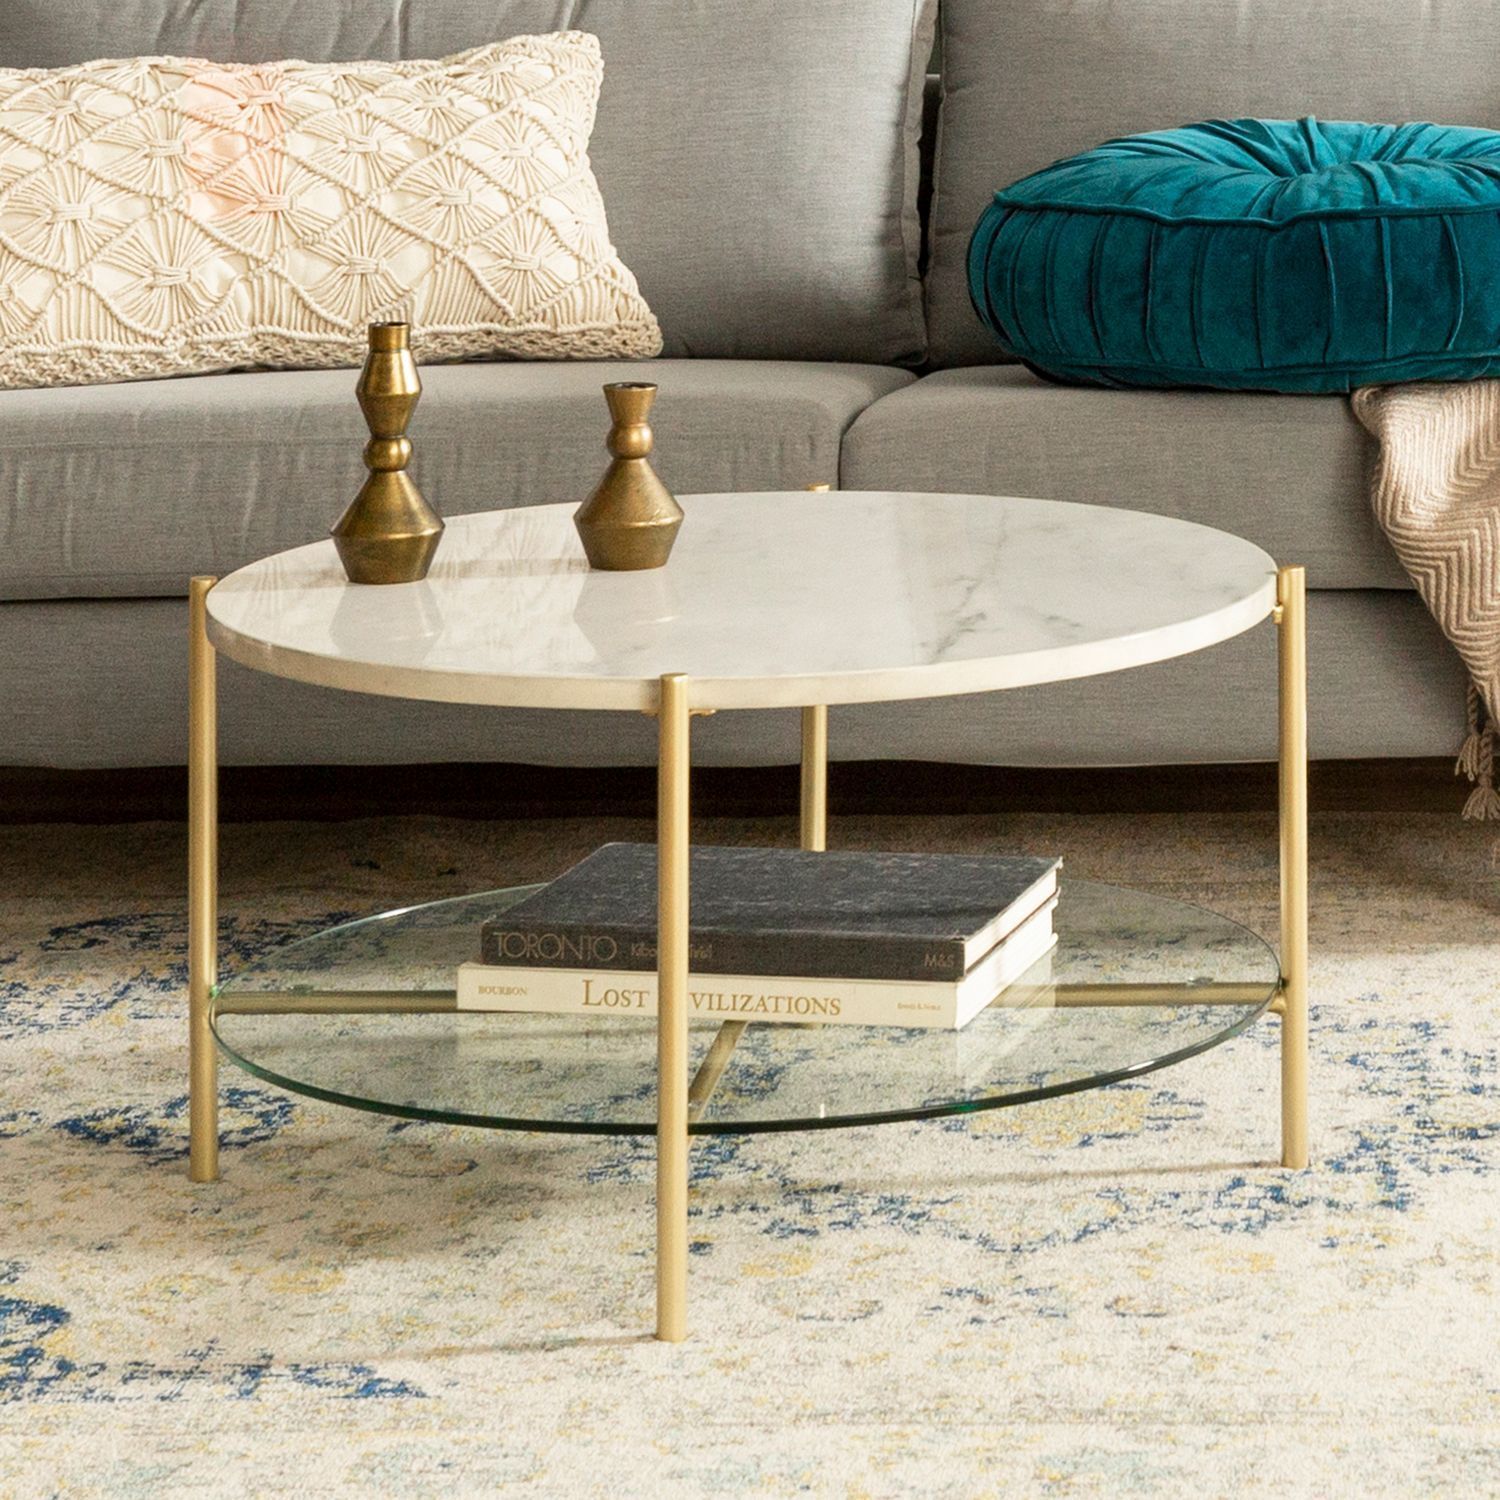 Round White Faux Marble & Gold Coffee Table With Glass Shelf | Pier 1 In Modern Round Faux Marble Coffee Tables (View 5 of 20)